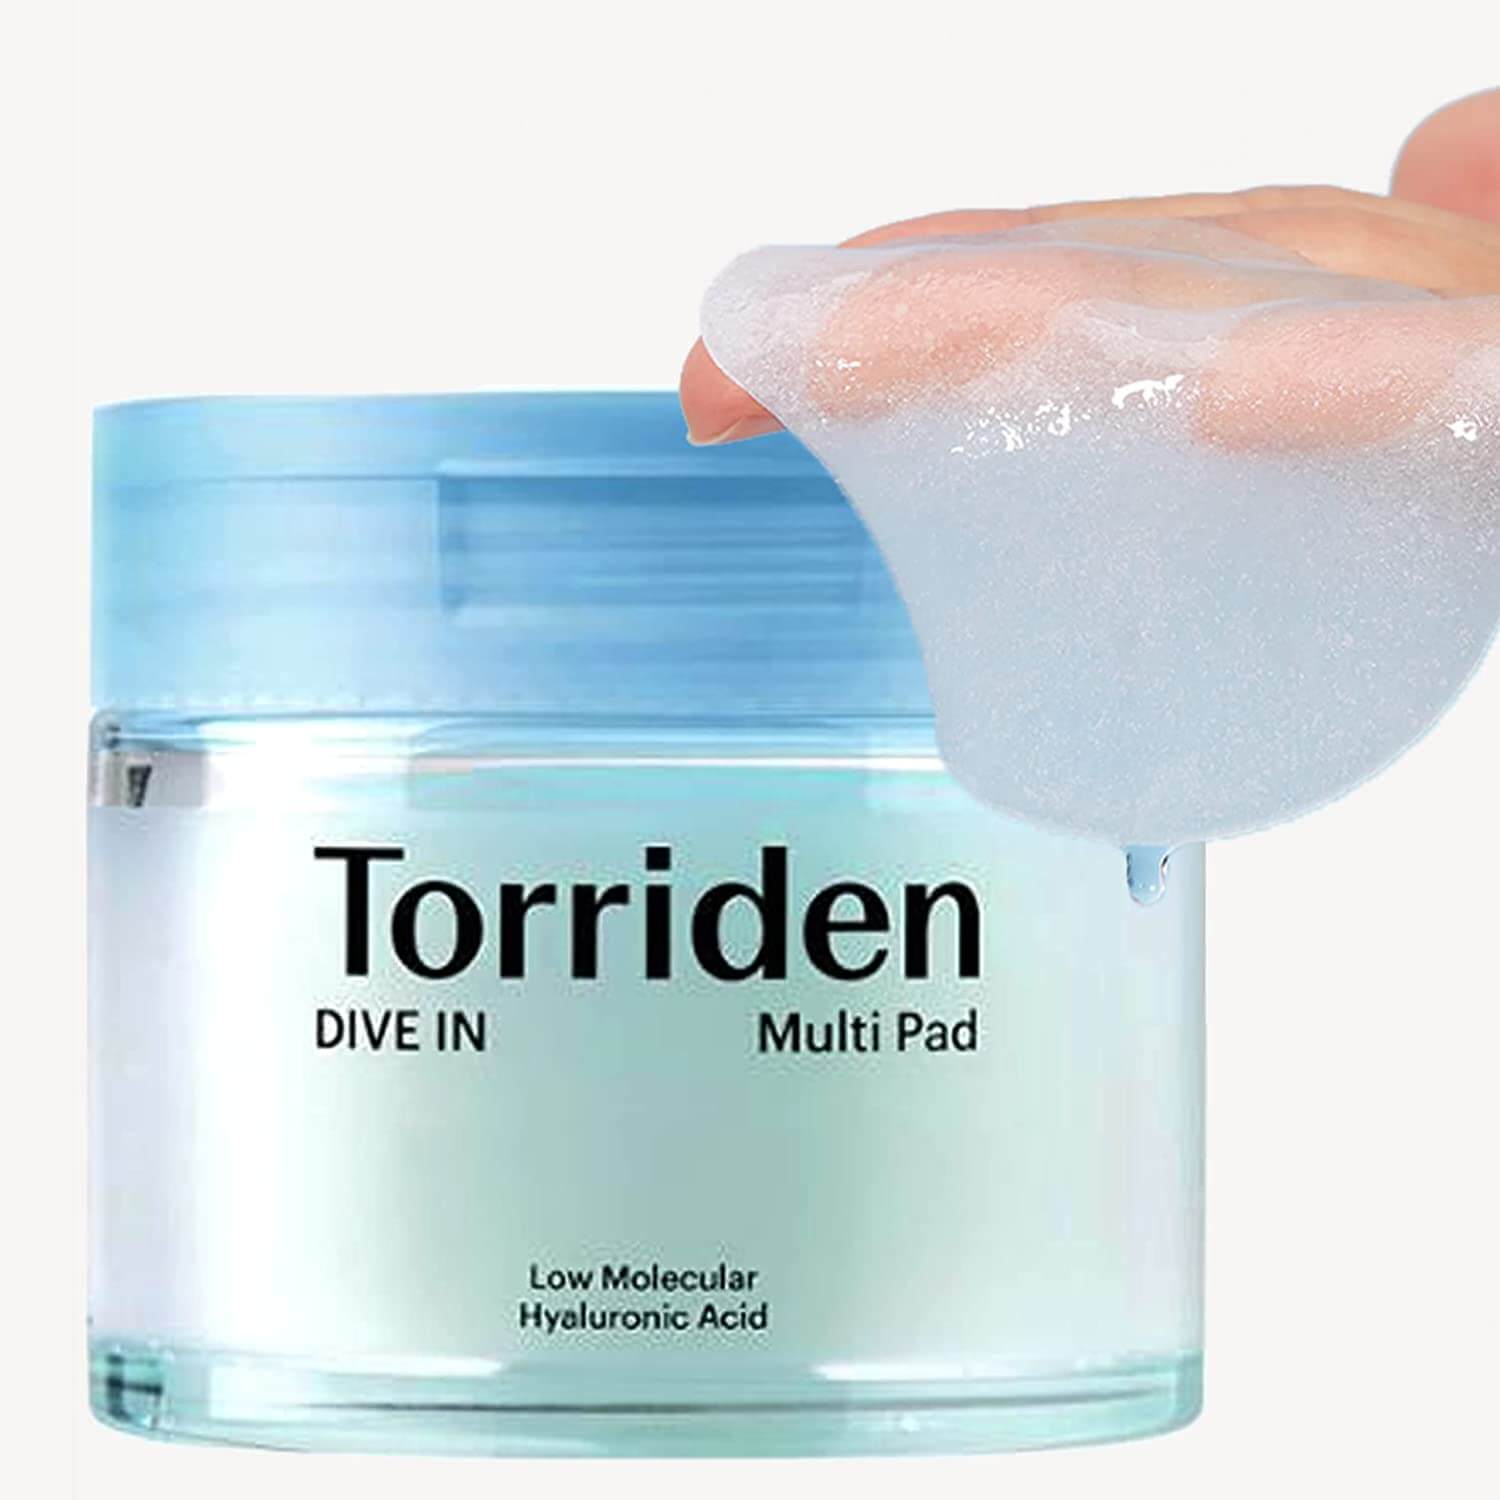 torriden dive in multi pad low moleculair hyaluronic acid toner pad hold in hand which is soaked in ample of the product perfect for irritated and dry skin who needs a boost of hydration